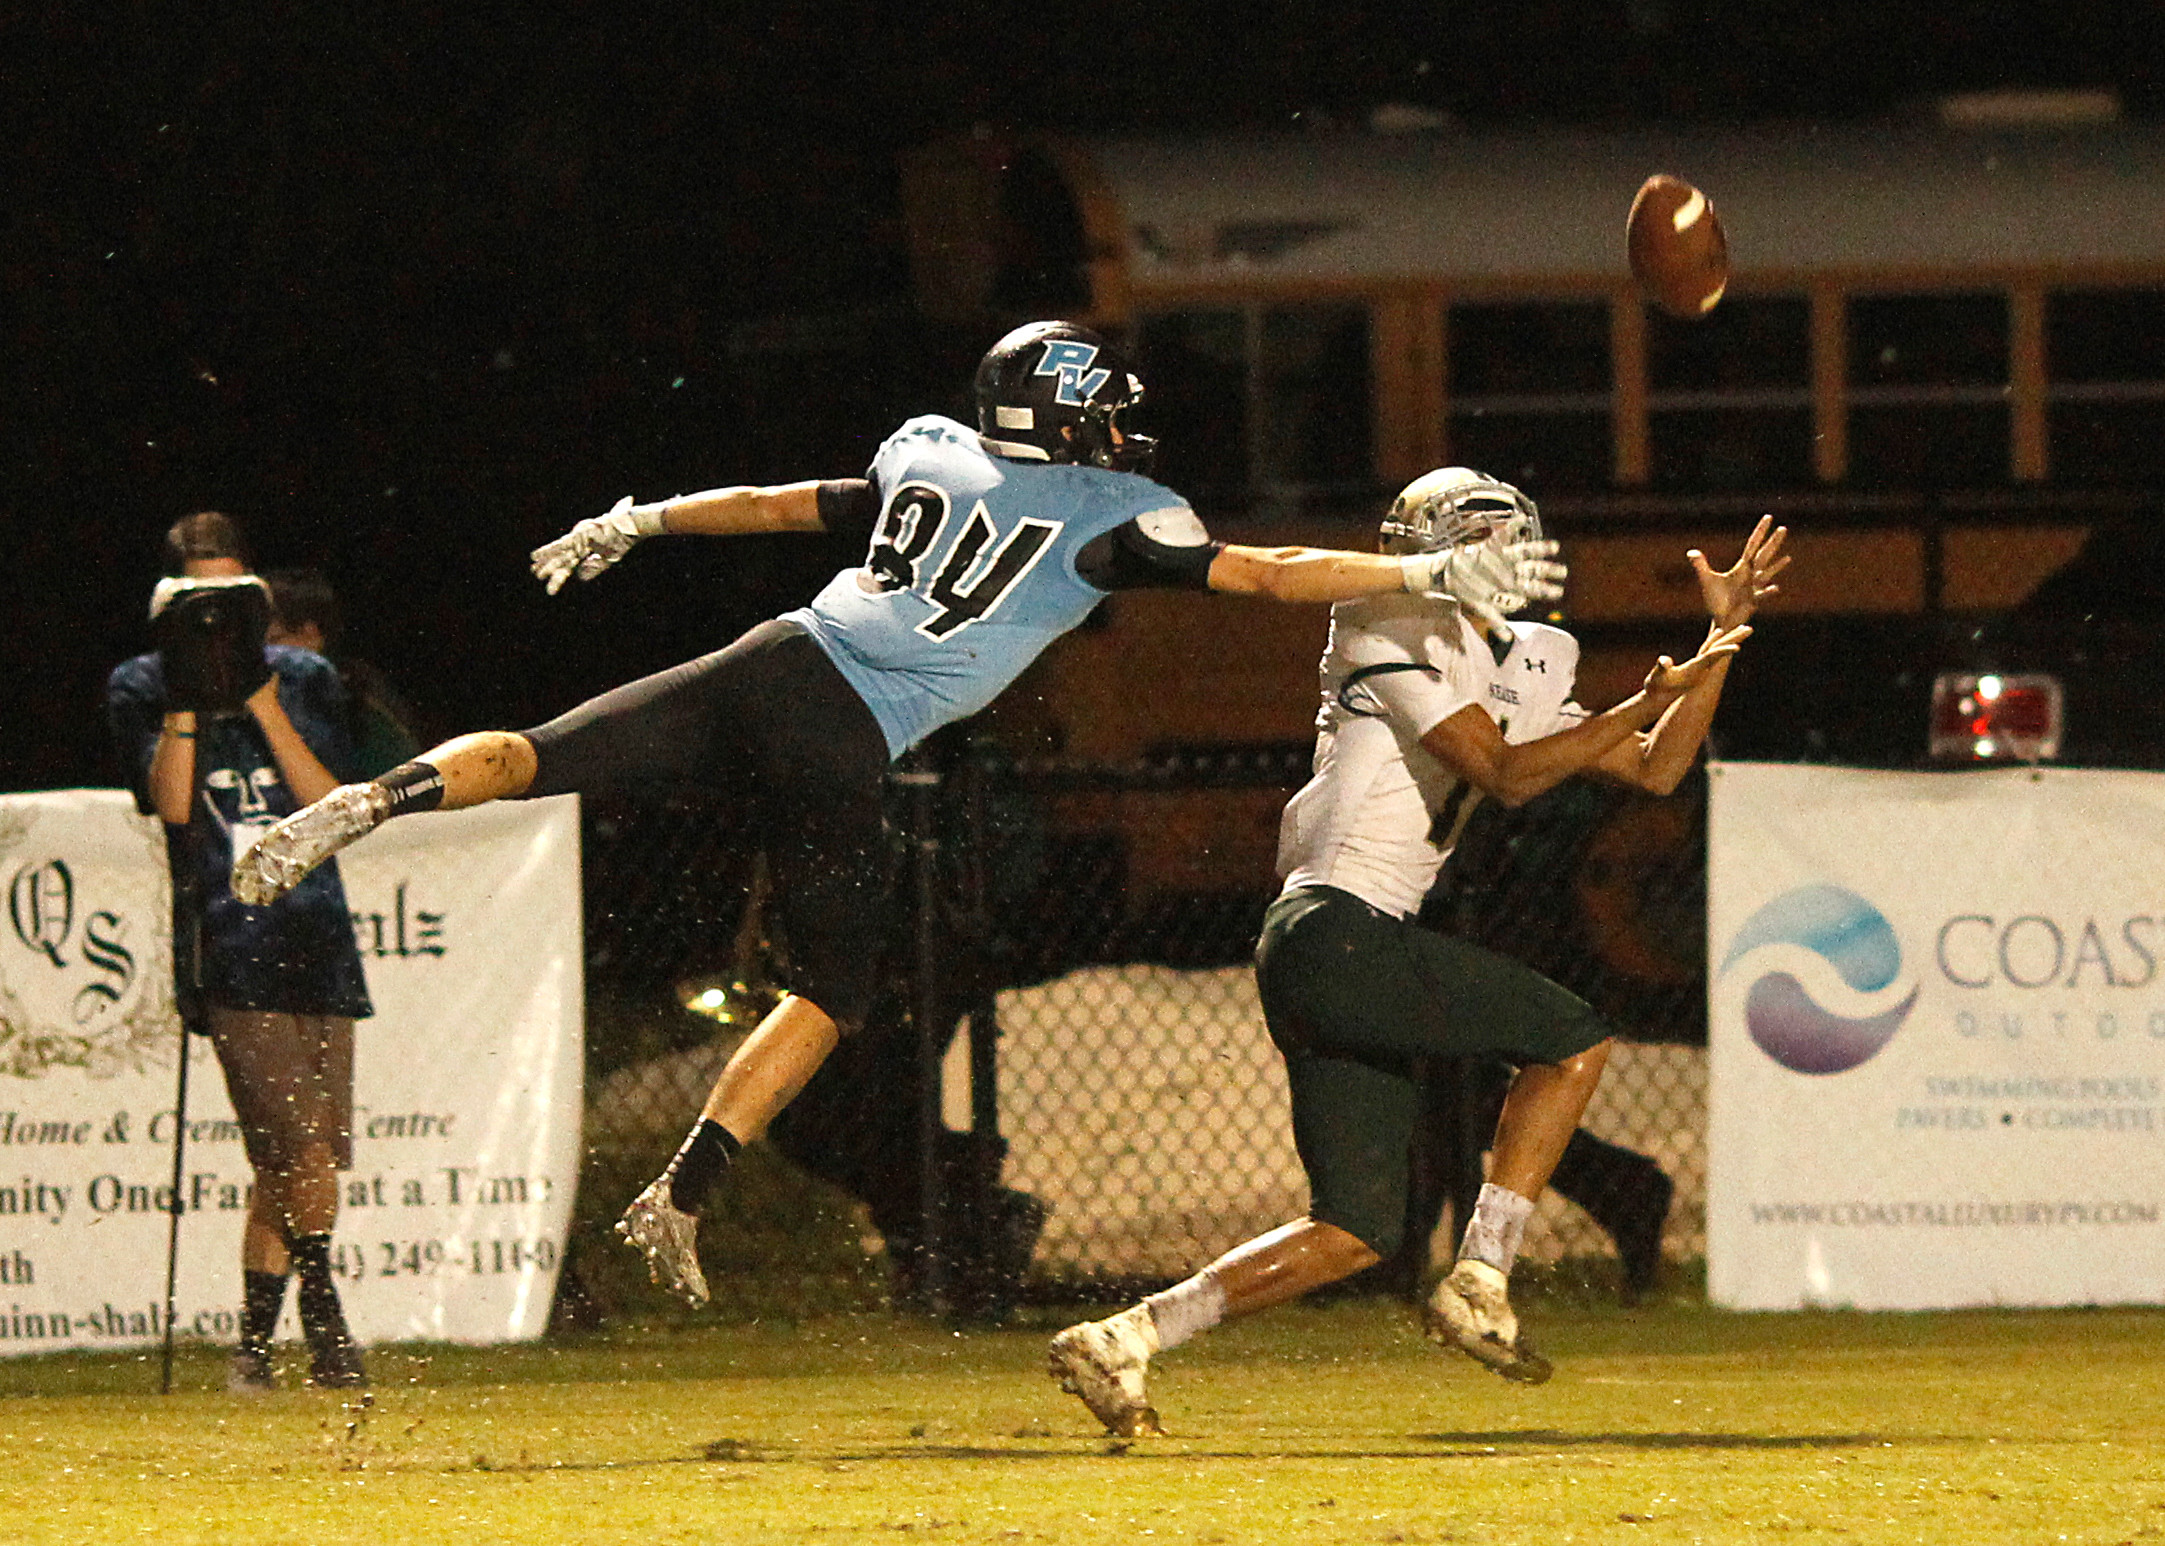 Jarrett Stepp, #84 leaps for a pass near the goal line but the ball is intercepted by Nease